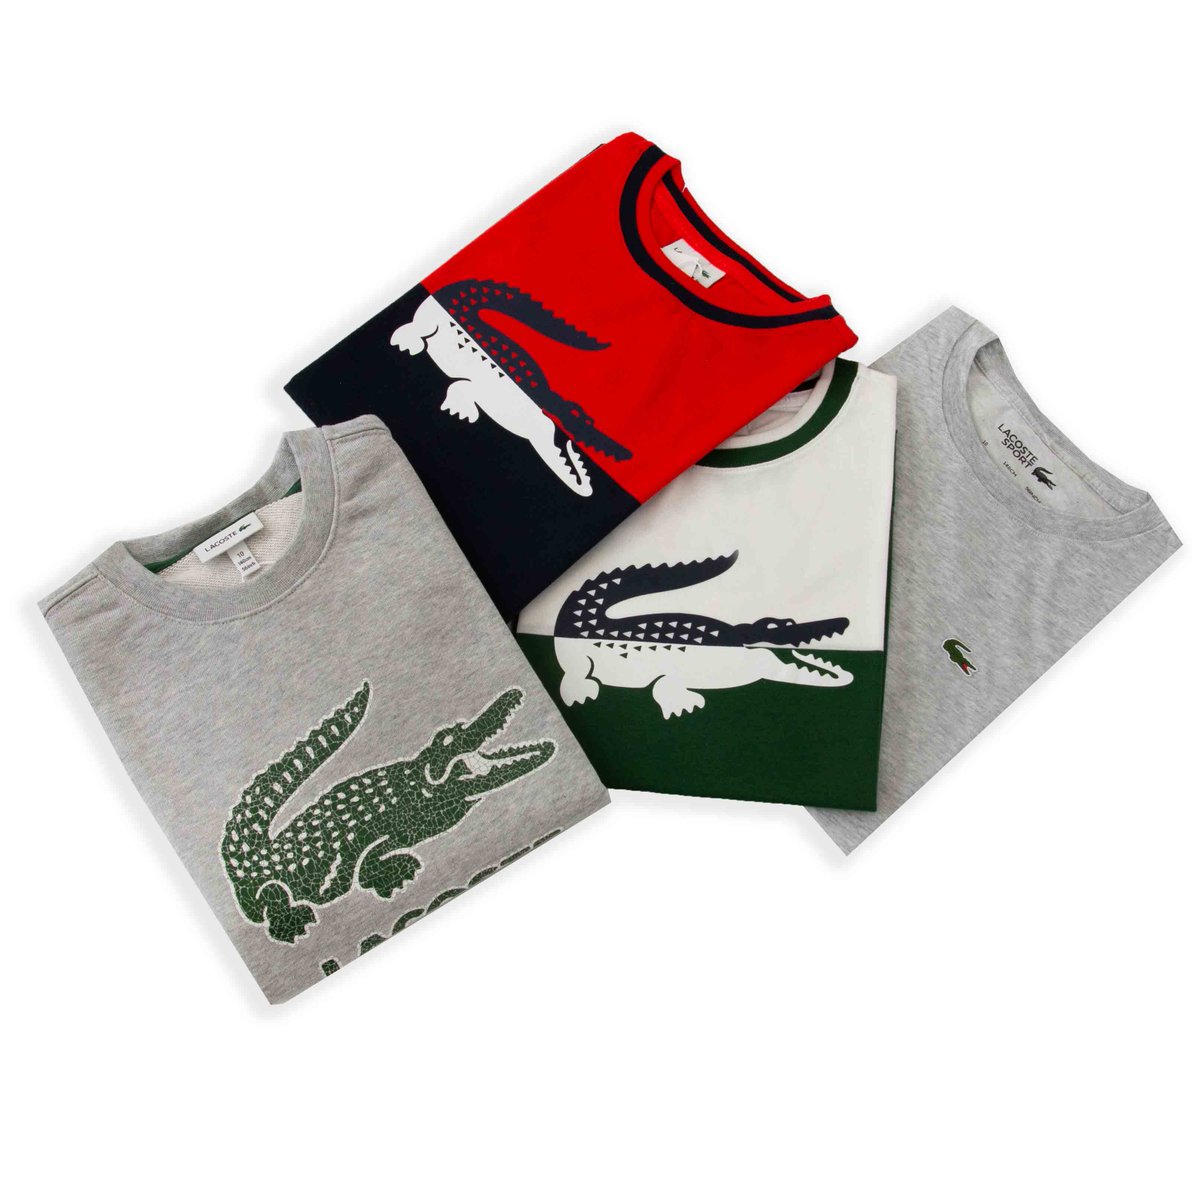 Lacoste's famed croc 🐊 Shop essential tees from Lacoste at Psyche Junior in the summer sale with up to 50% off! 

ow.ly/FMTa50F7tdK

#Lacoste #LacosteKids #LacosteJunior #LacosteSale #DesignerSale